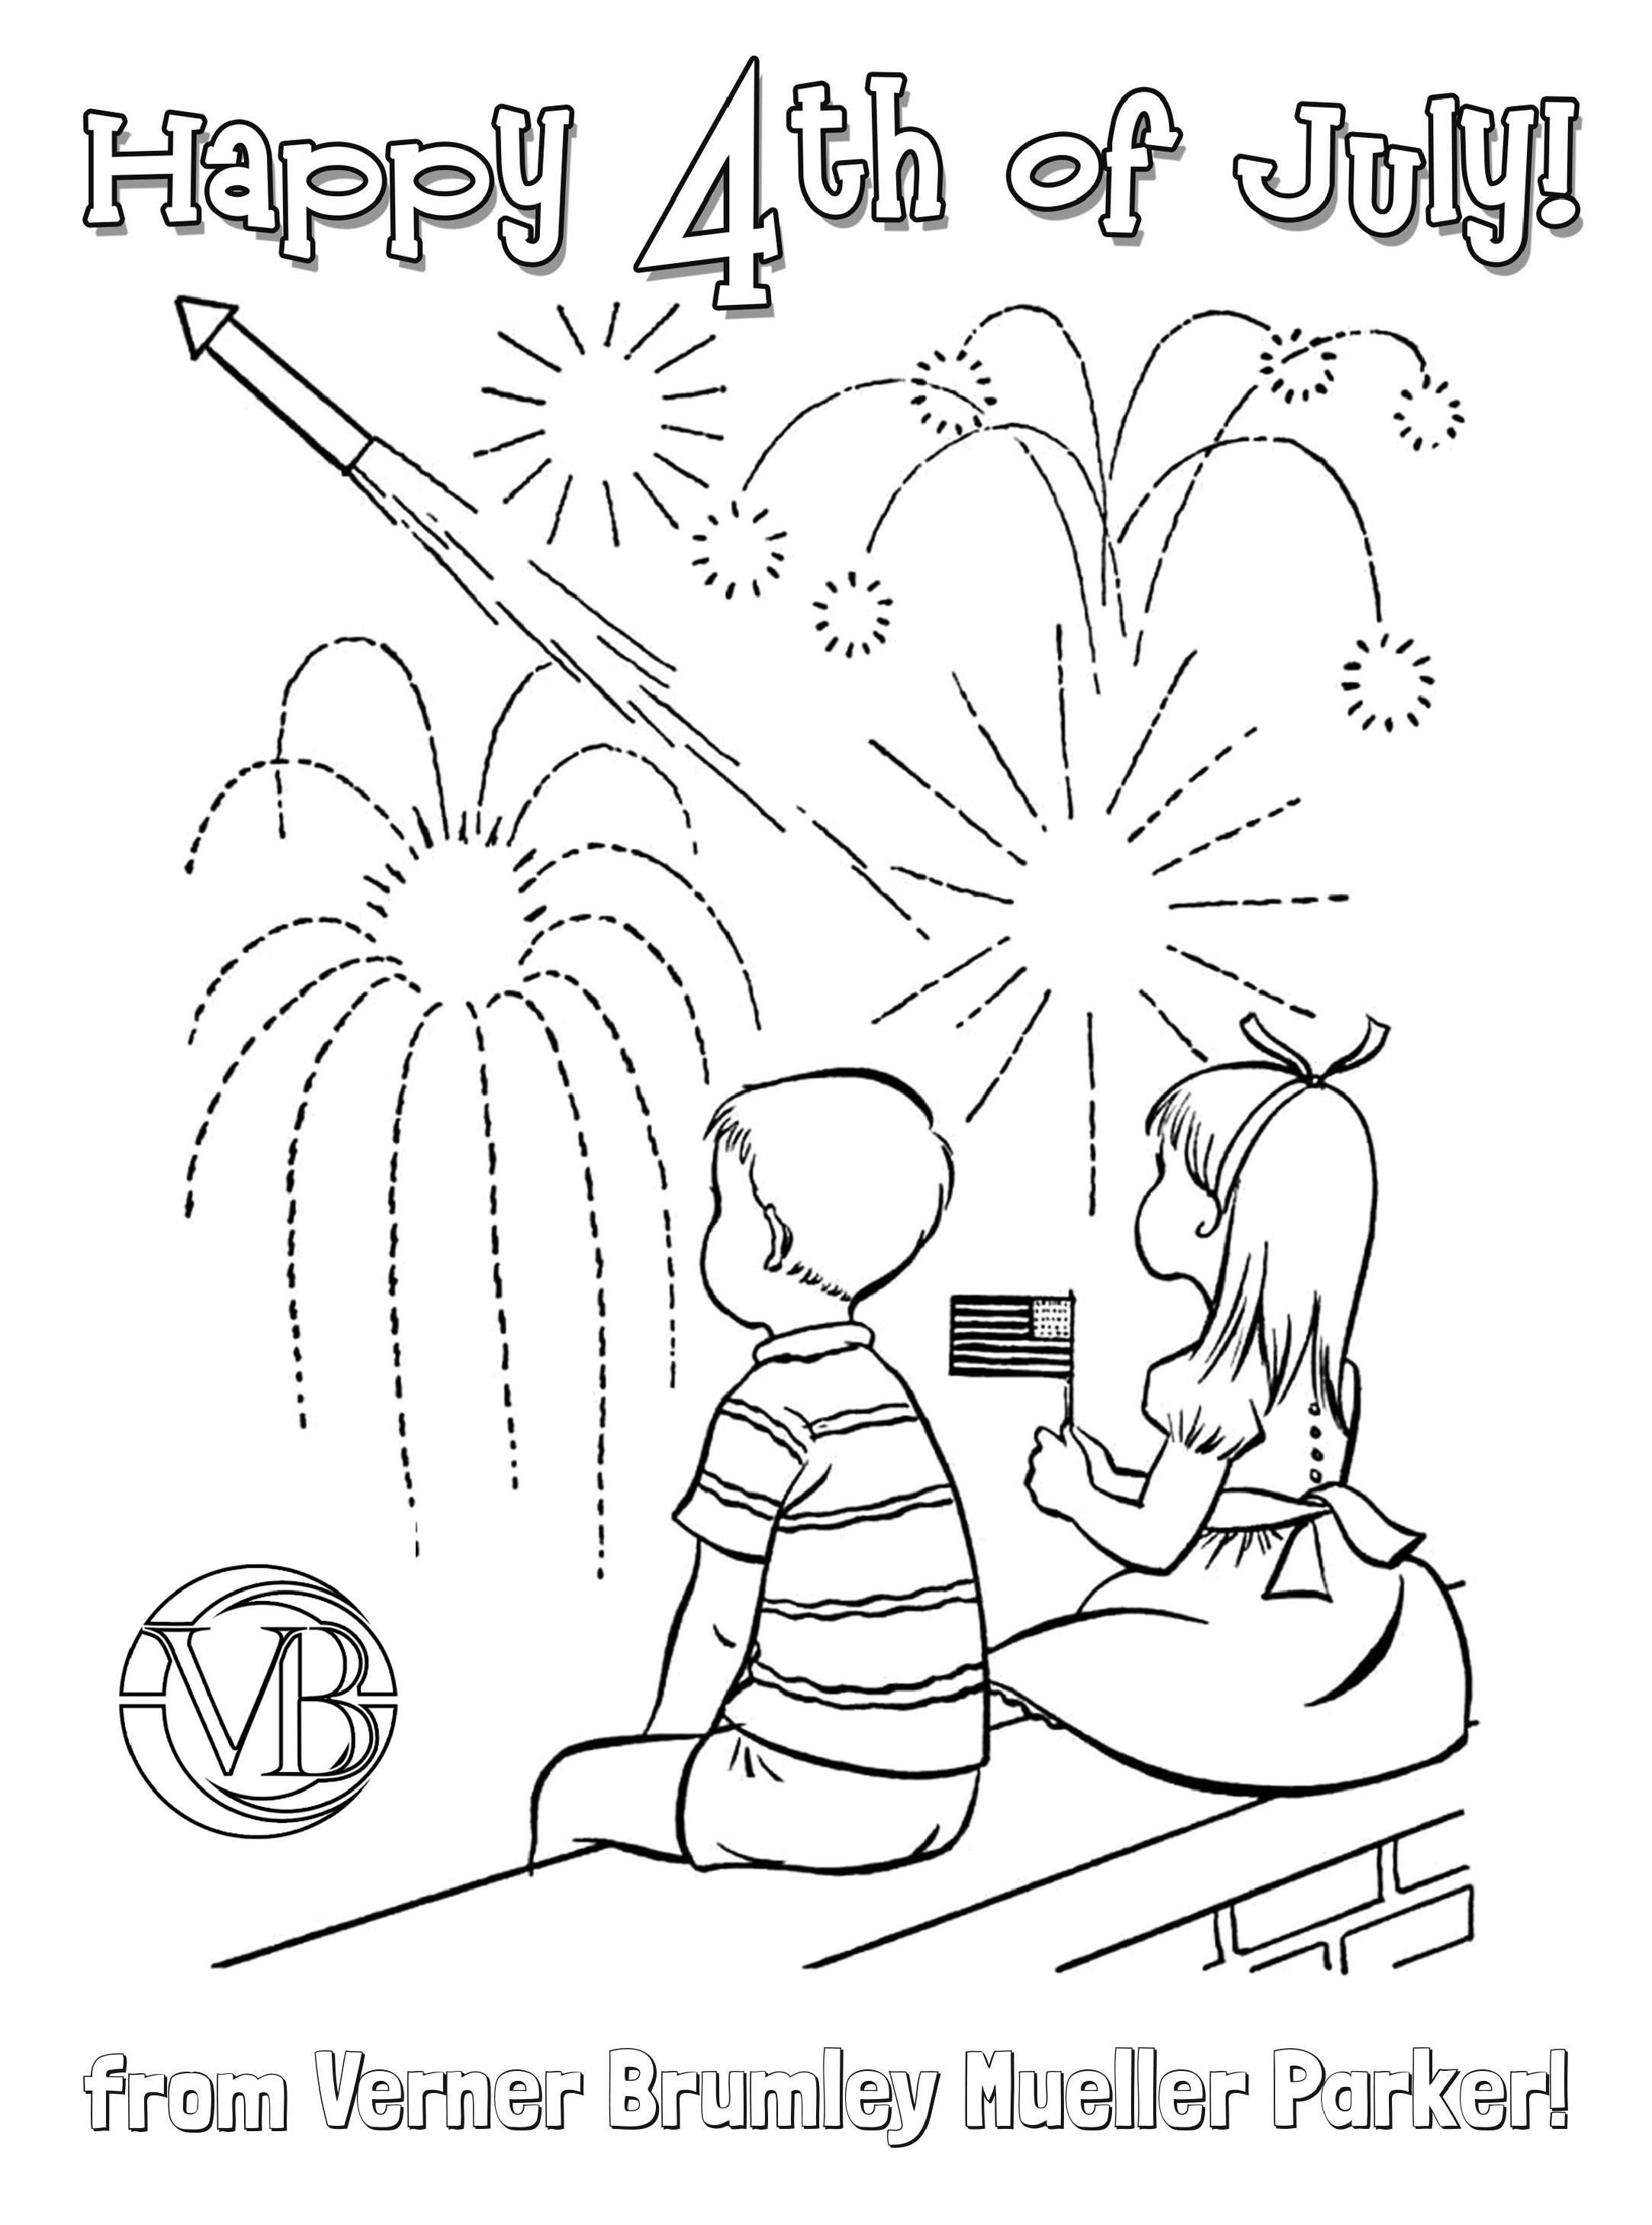 Celebrate Freedom with 4th of July: 180+ Free Coloring Pages 162